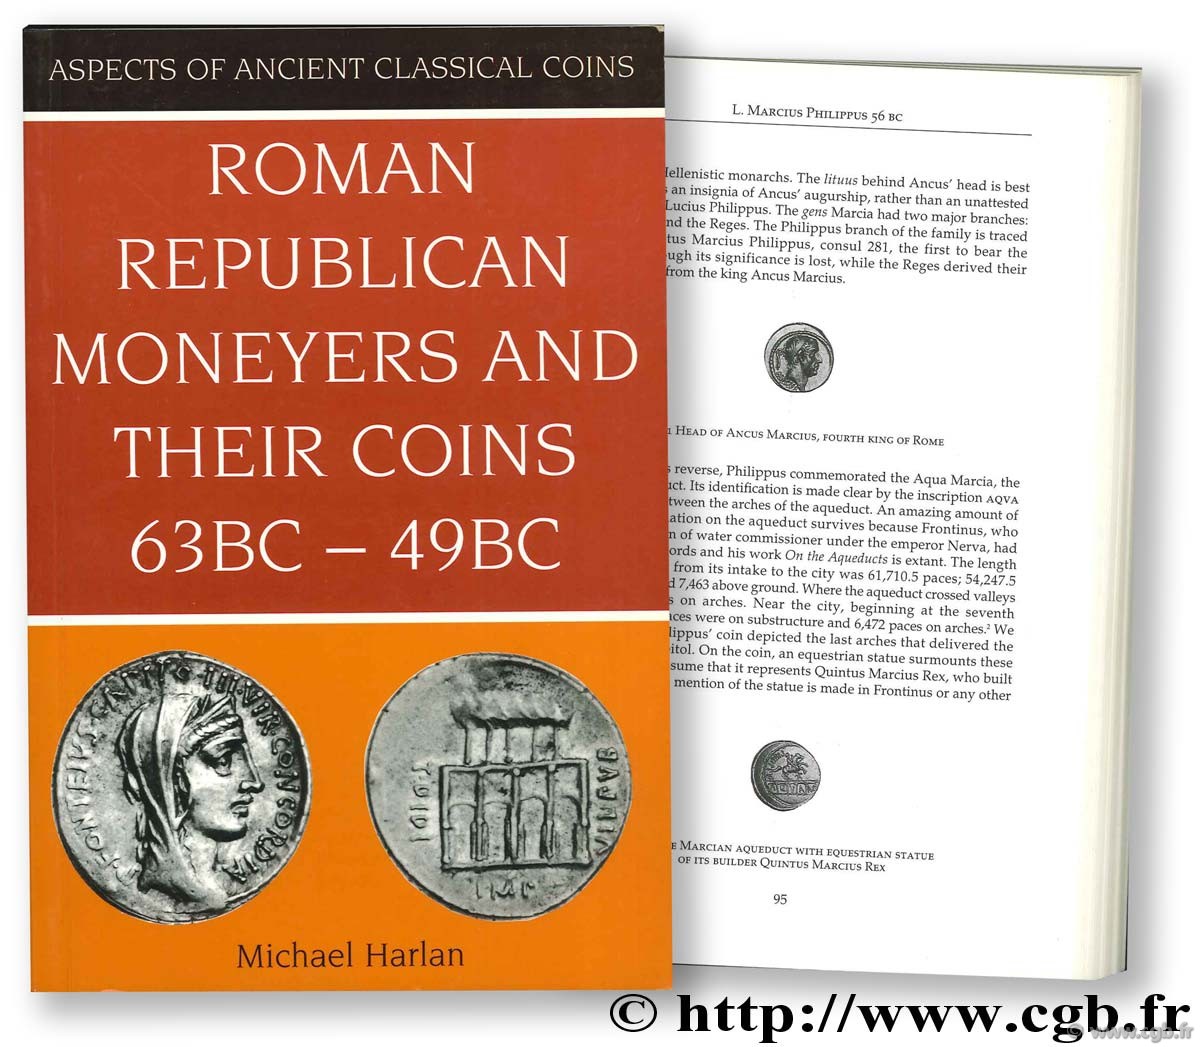 Roman Republican Moneyers and their Coins (63 BC - 49 BC) HARLAN M.